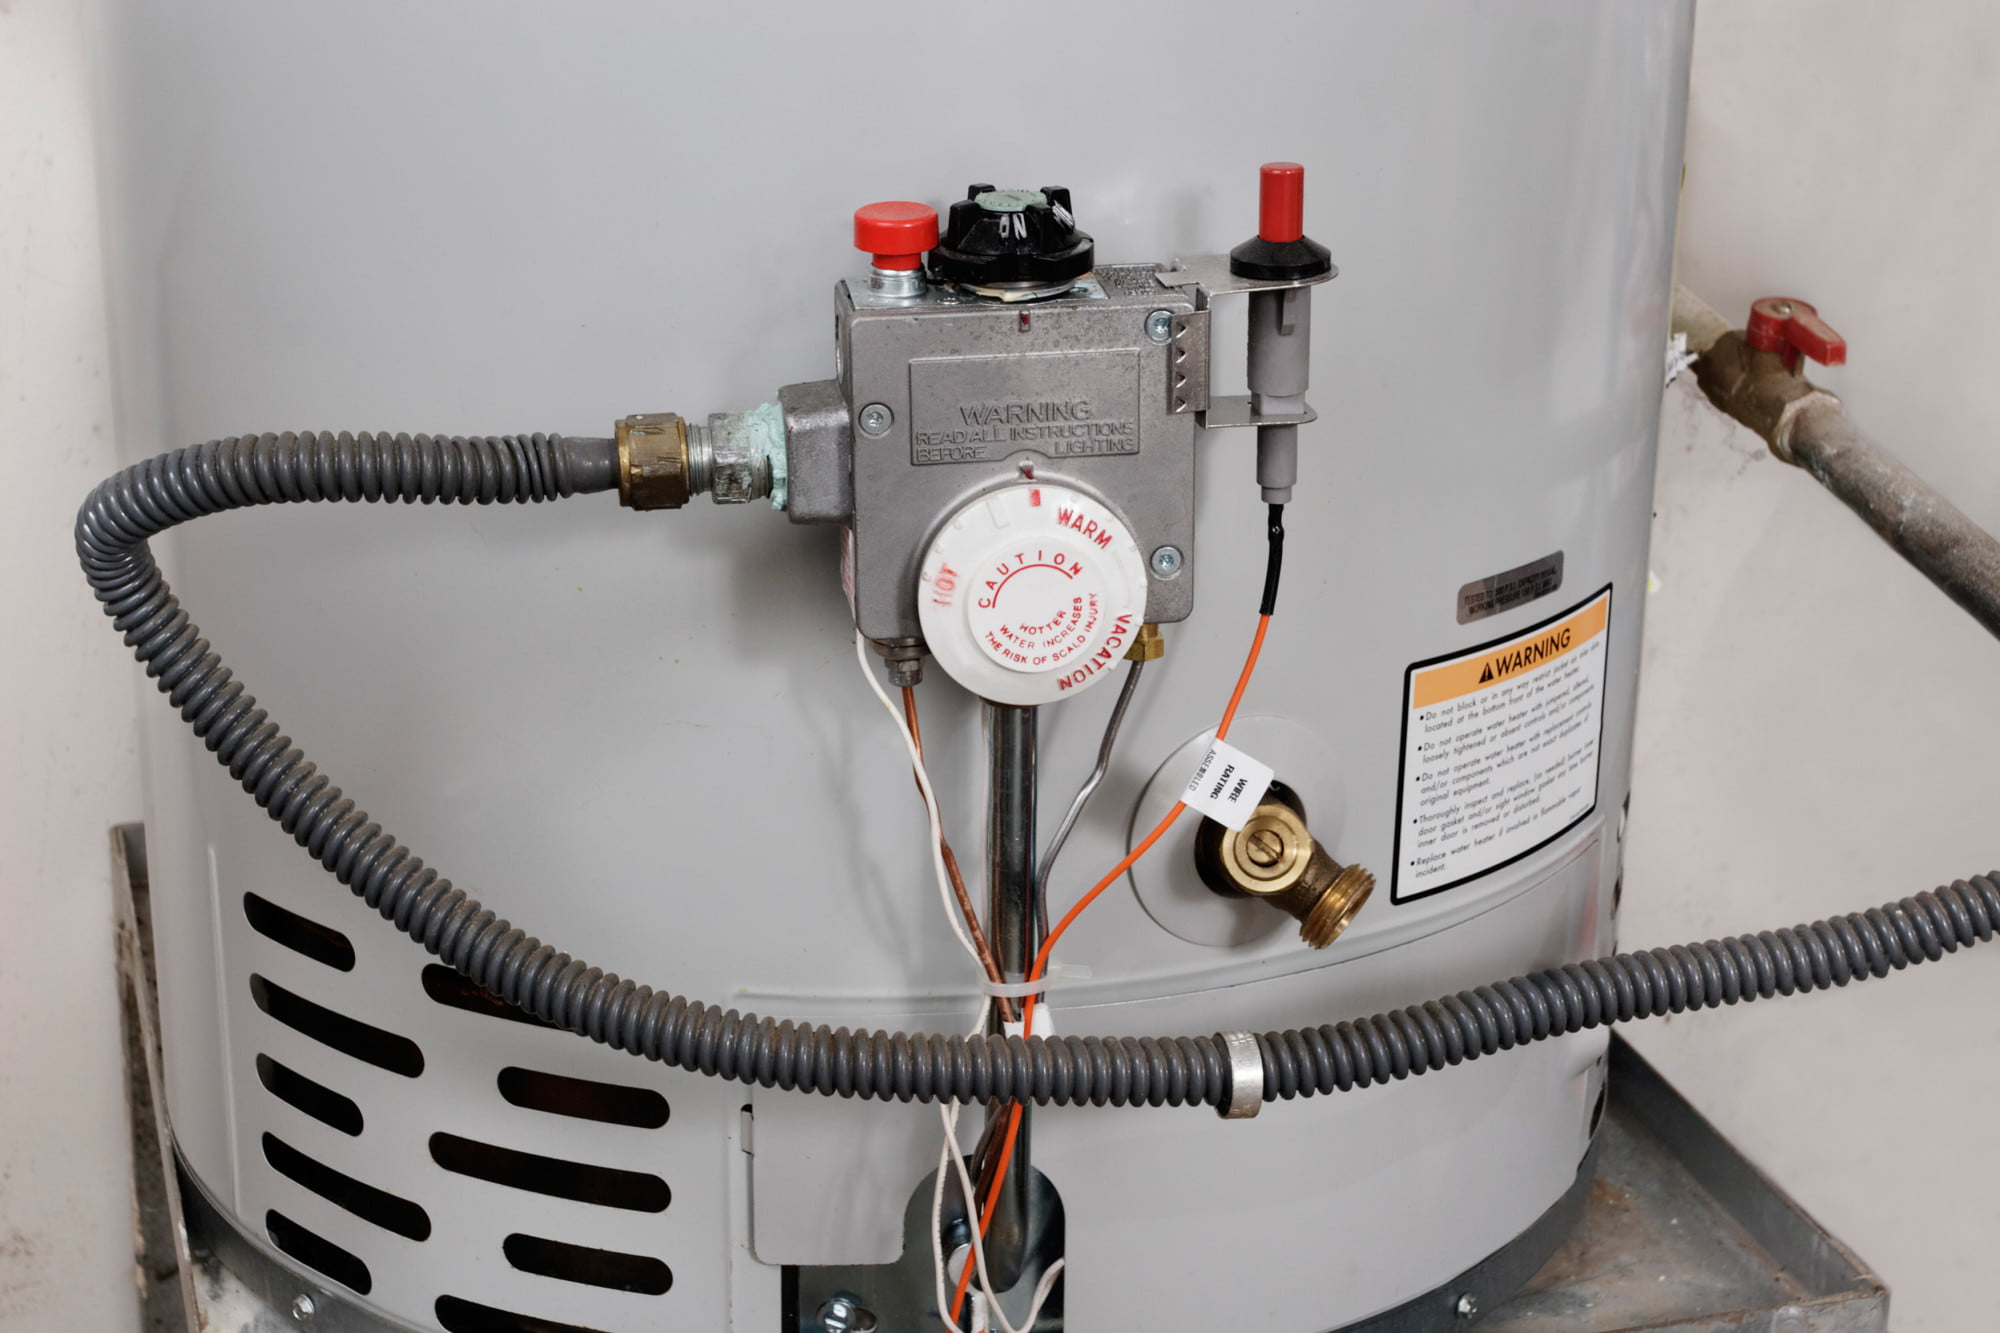 Regular water heater maintenance can extend the life of your unit and help avoid costly repairs. Read about the water heater maintenance tips you need to know.